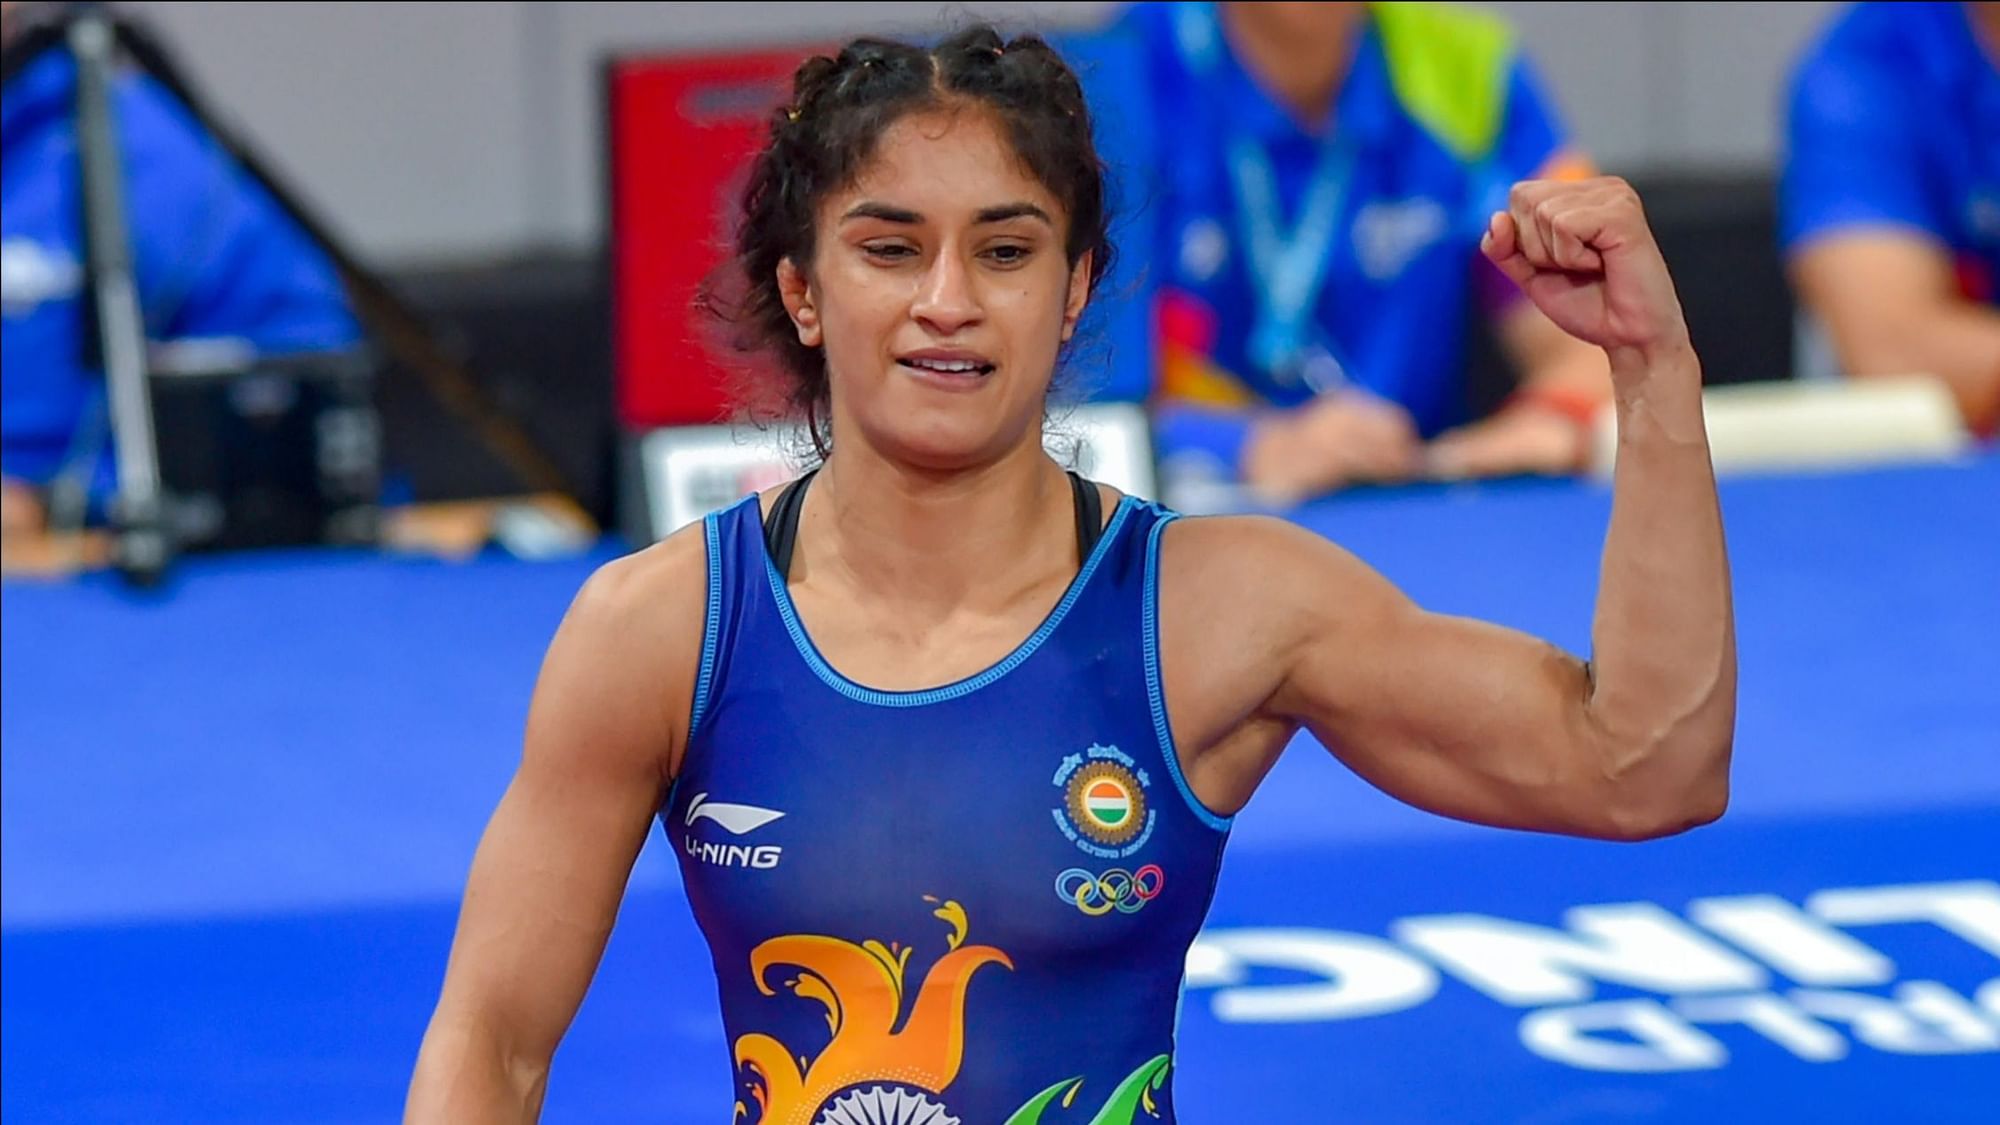 Vinesh Phogat’s first two rounds at the World Championships are on Tuesday.